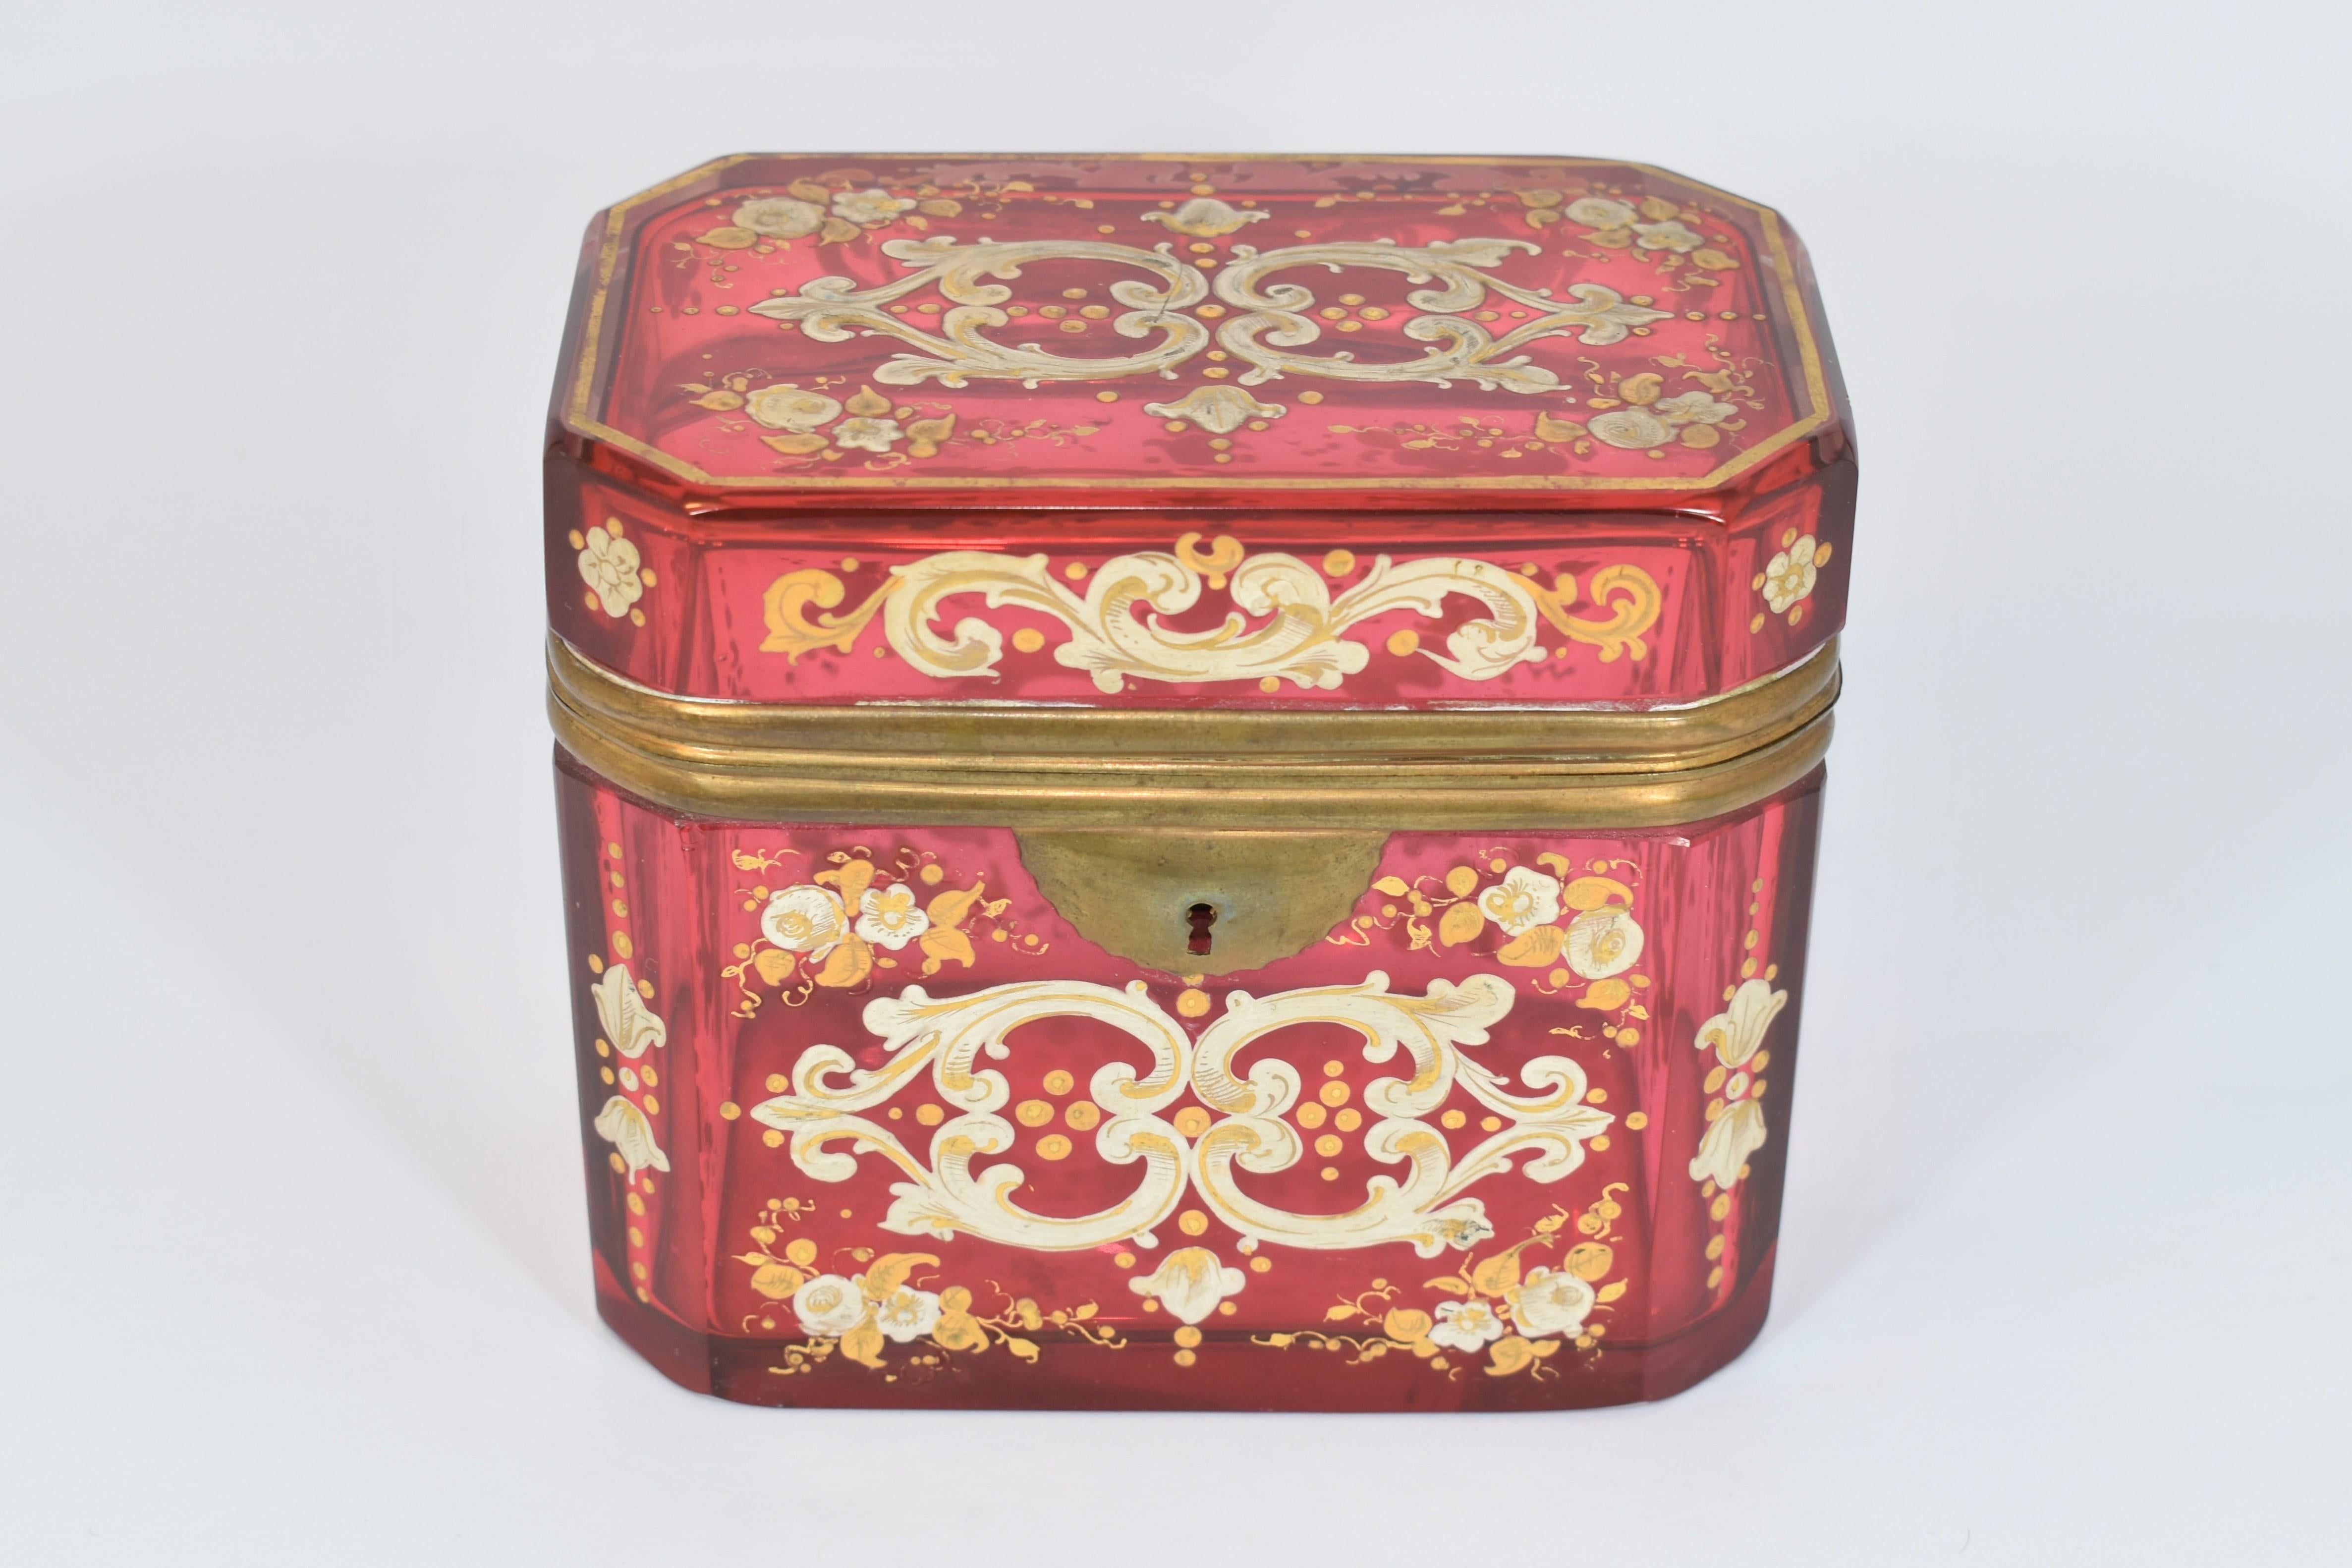 Antique Bohemian jewellery box, 2nd half of the 19th century, cranberry glass, with floral-ornamental gilded enamel decoration all around

High quality Bohemian crystal.